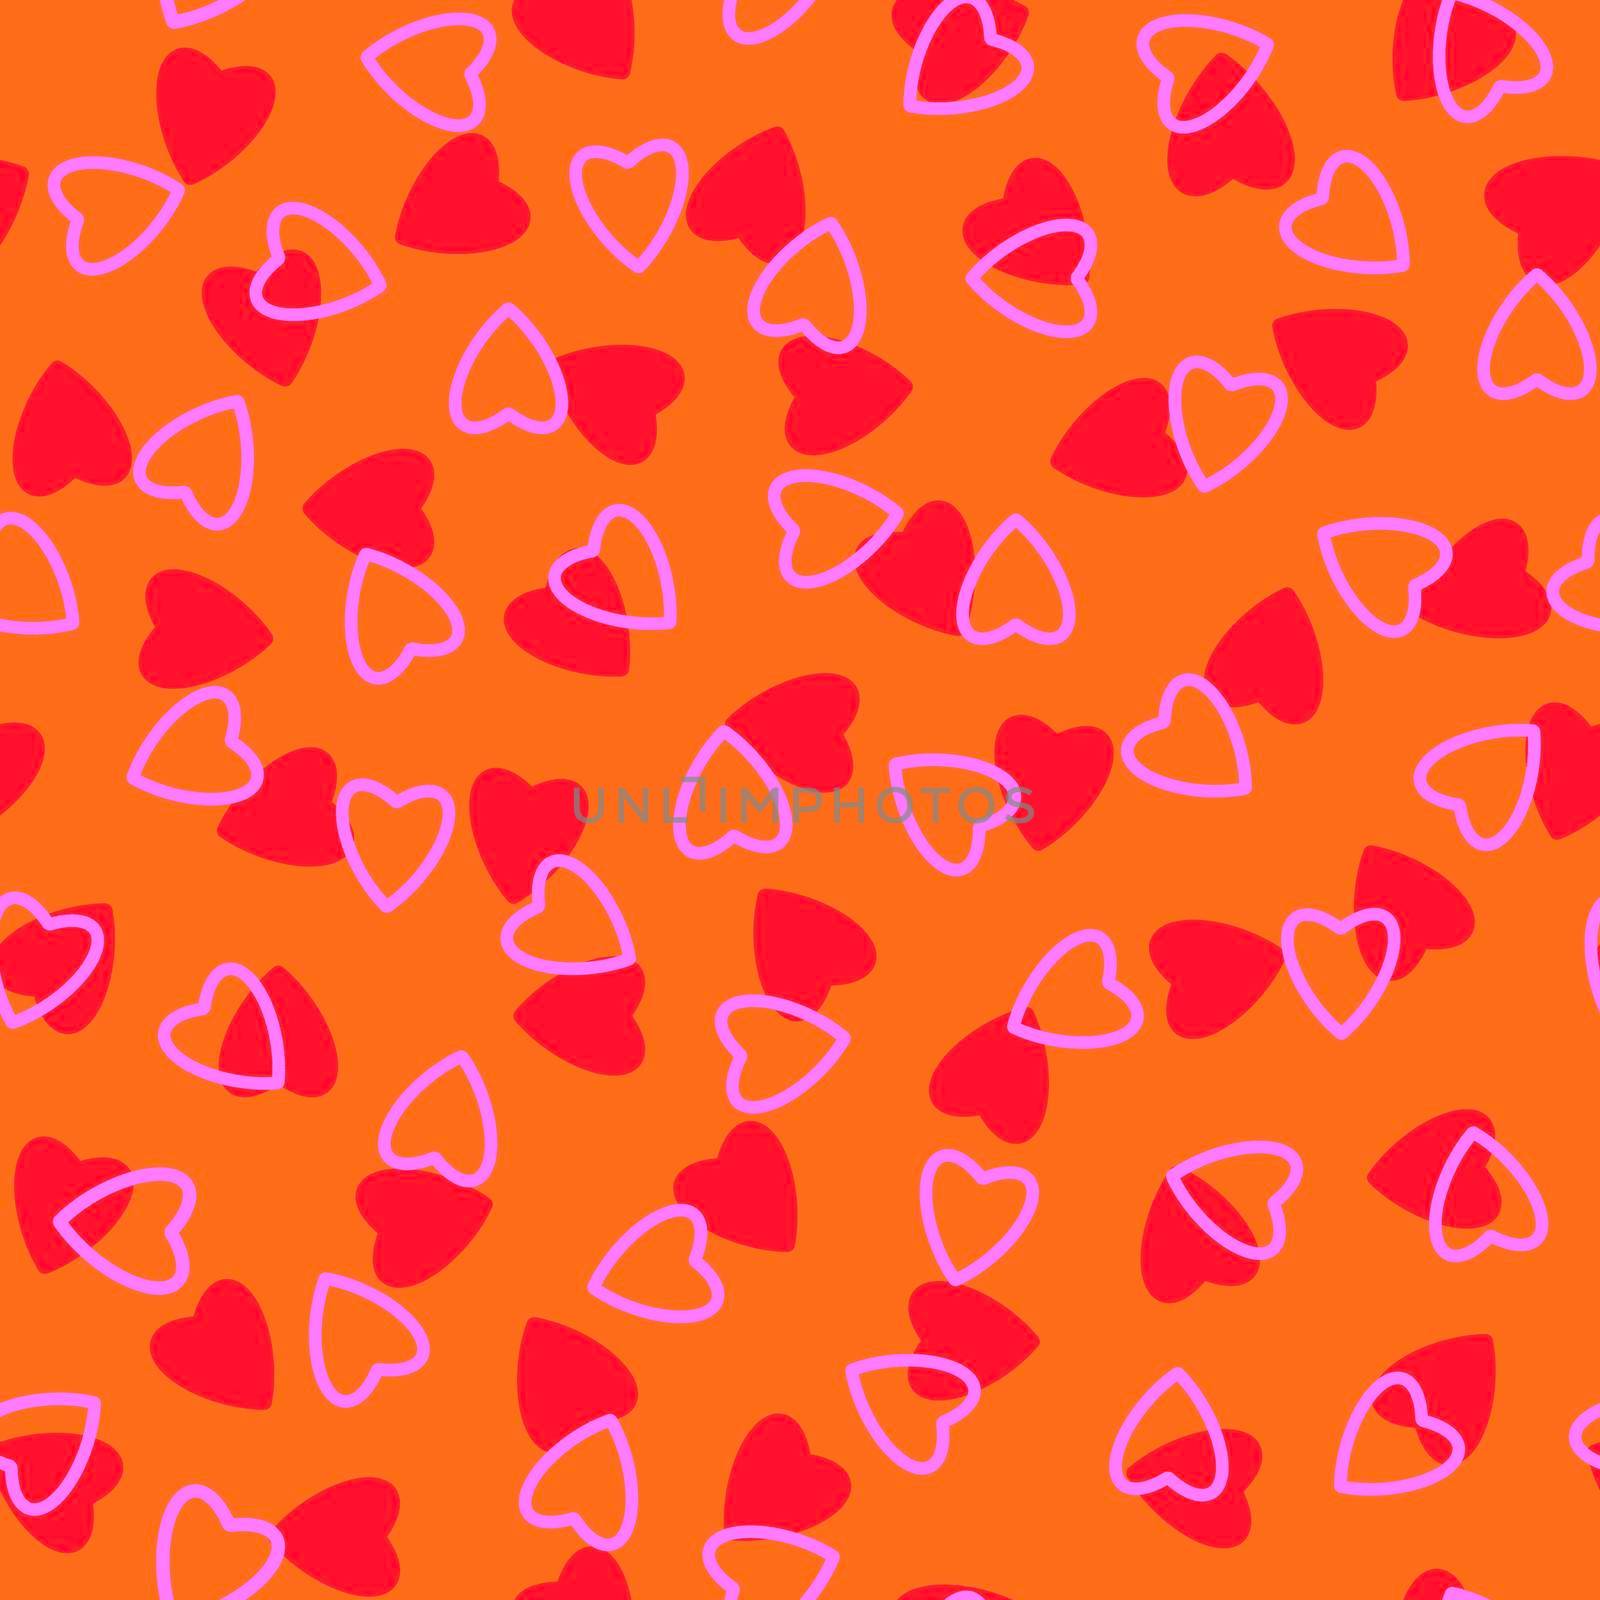 Simple hearts seamless pattern,endless chaotic texture made of tiny heart silhouettes.Valentines,mothers day background.Great for Easter,wedding,scrapbook,gift wrapping paper,textiles.Red,pink,orange by Angelsmoon